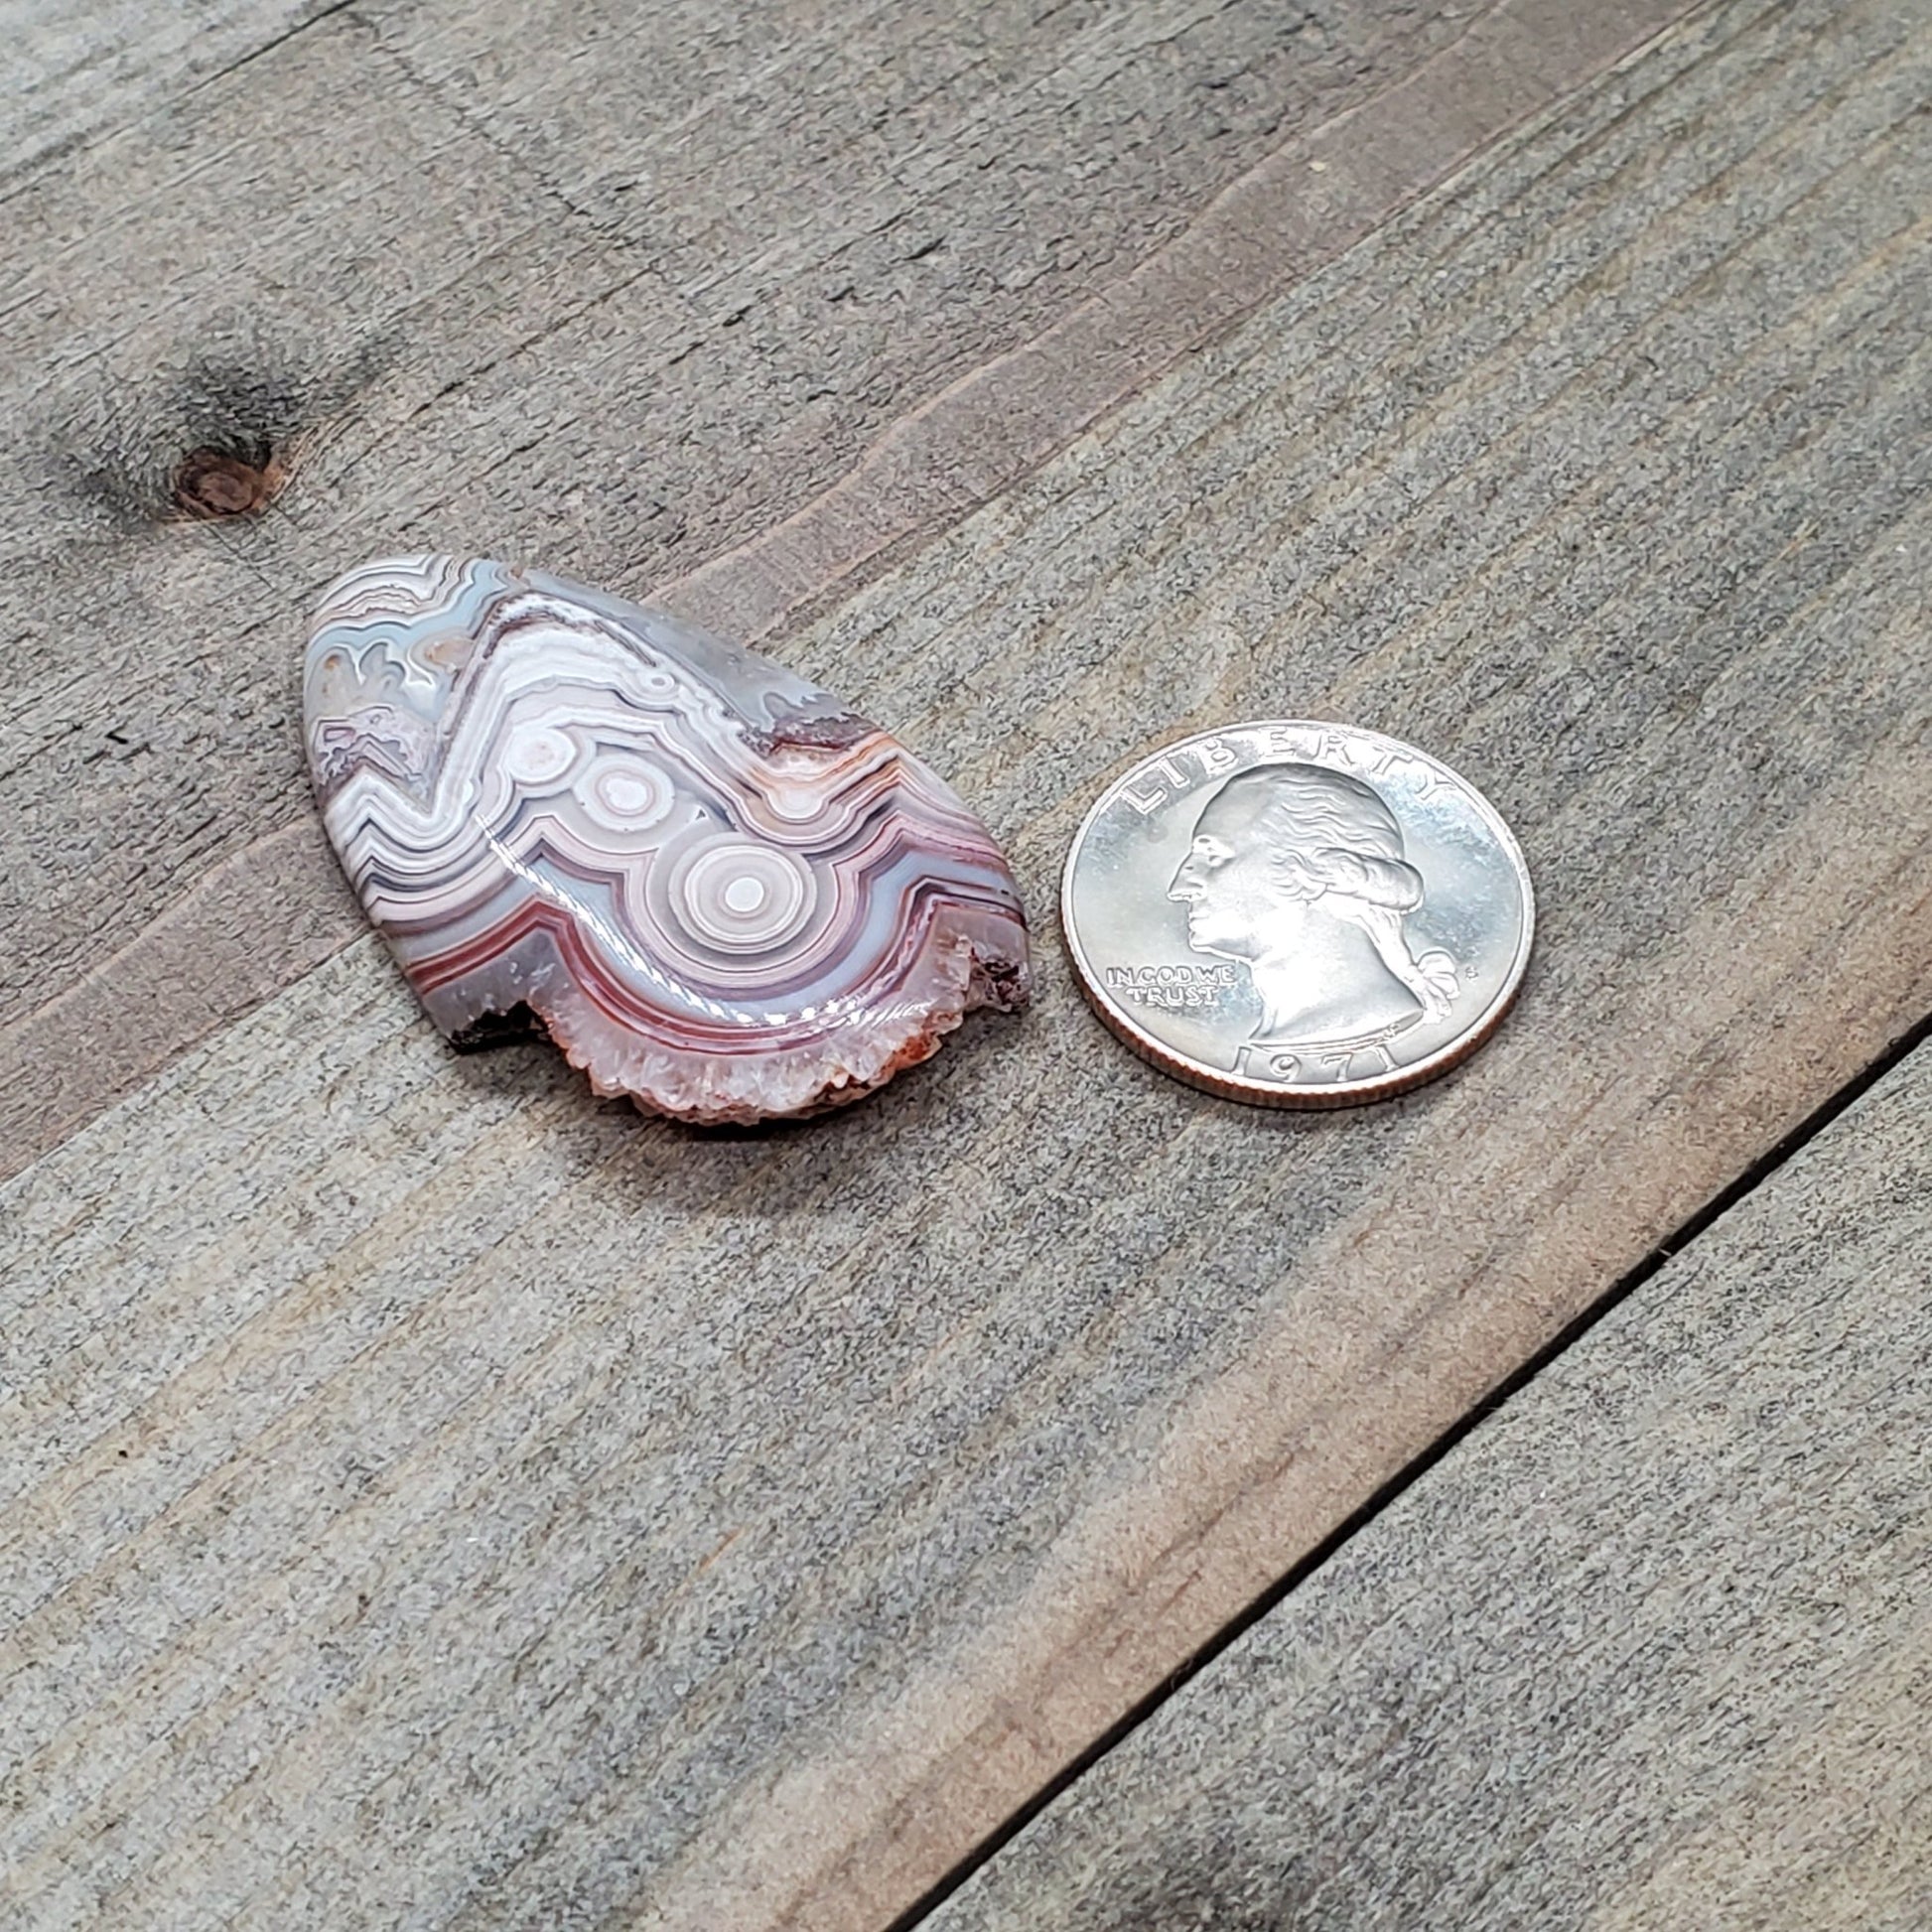 Crazy Lace Agate Druzy - Edge Cabochon - 62.5 carats - Earth & Hammer